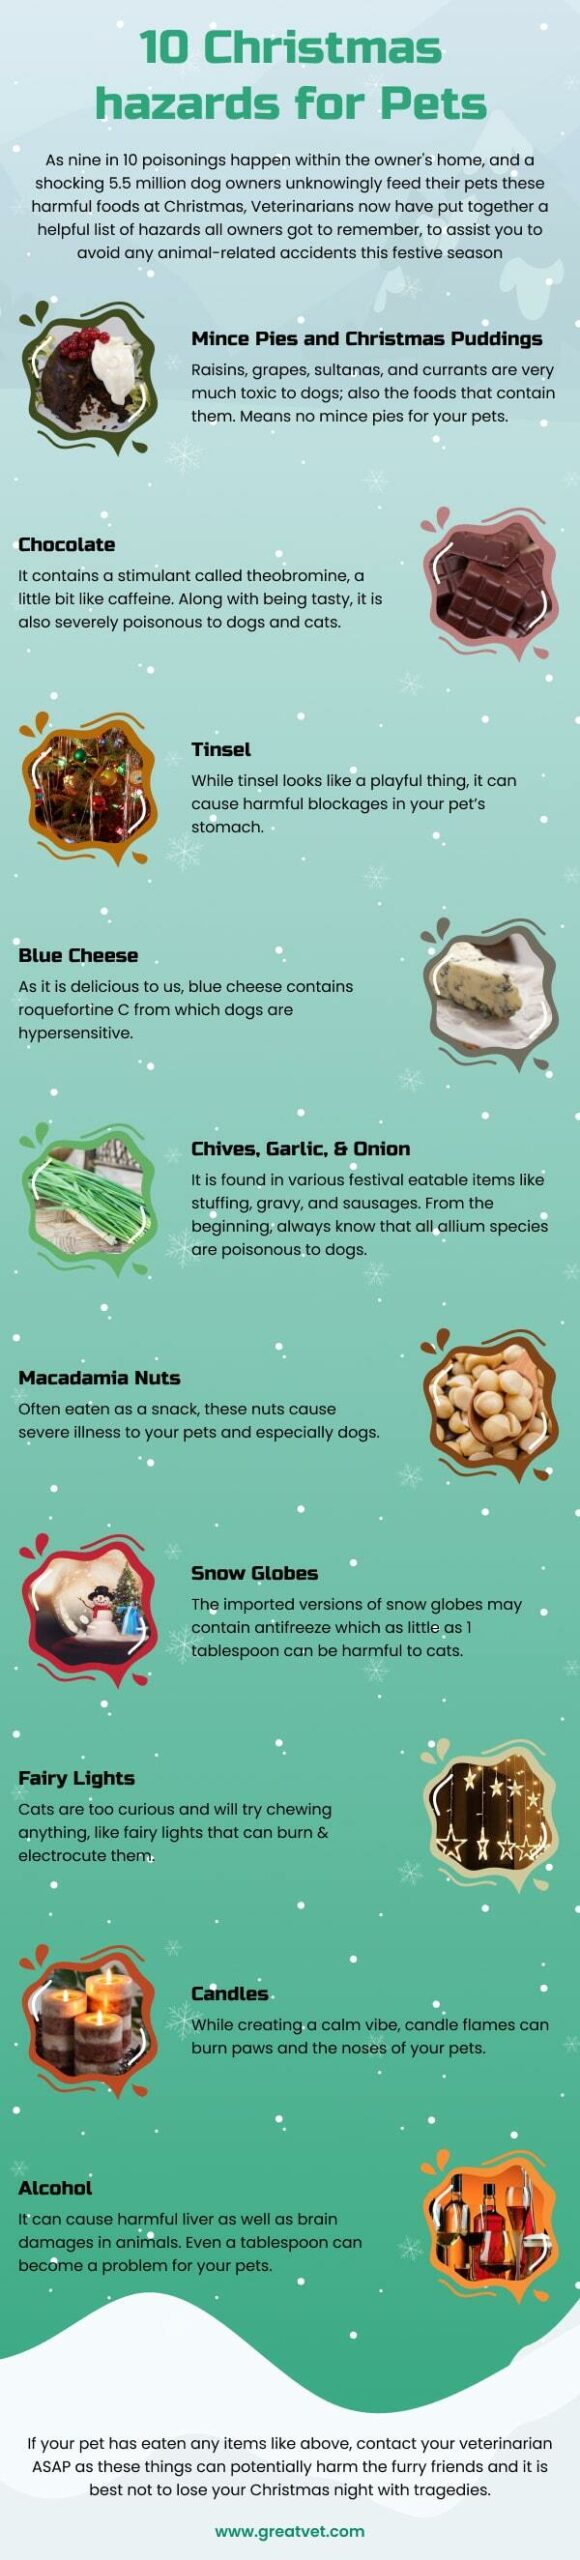 10 Christmas hazards for Pets - GreatVet [Infographic]